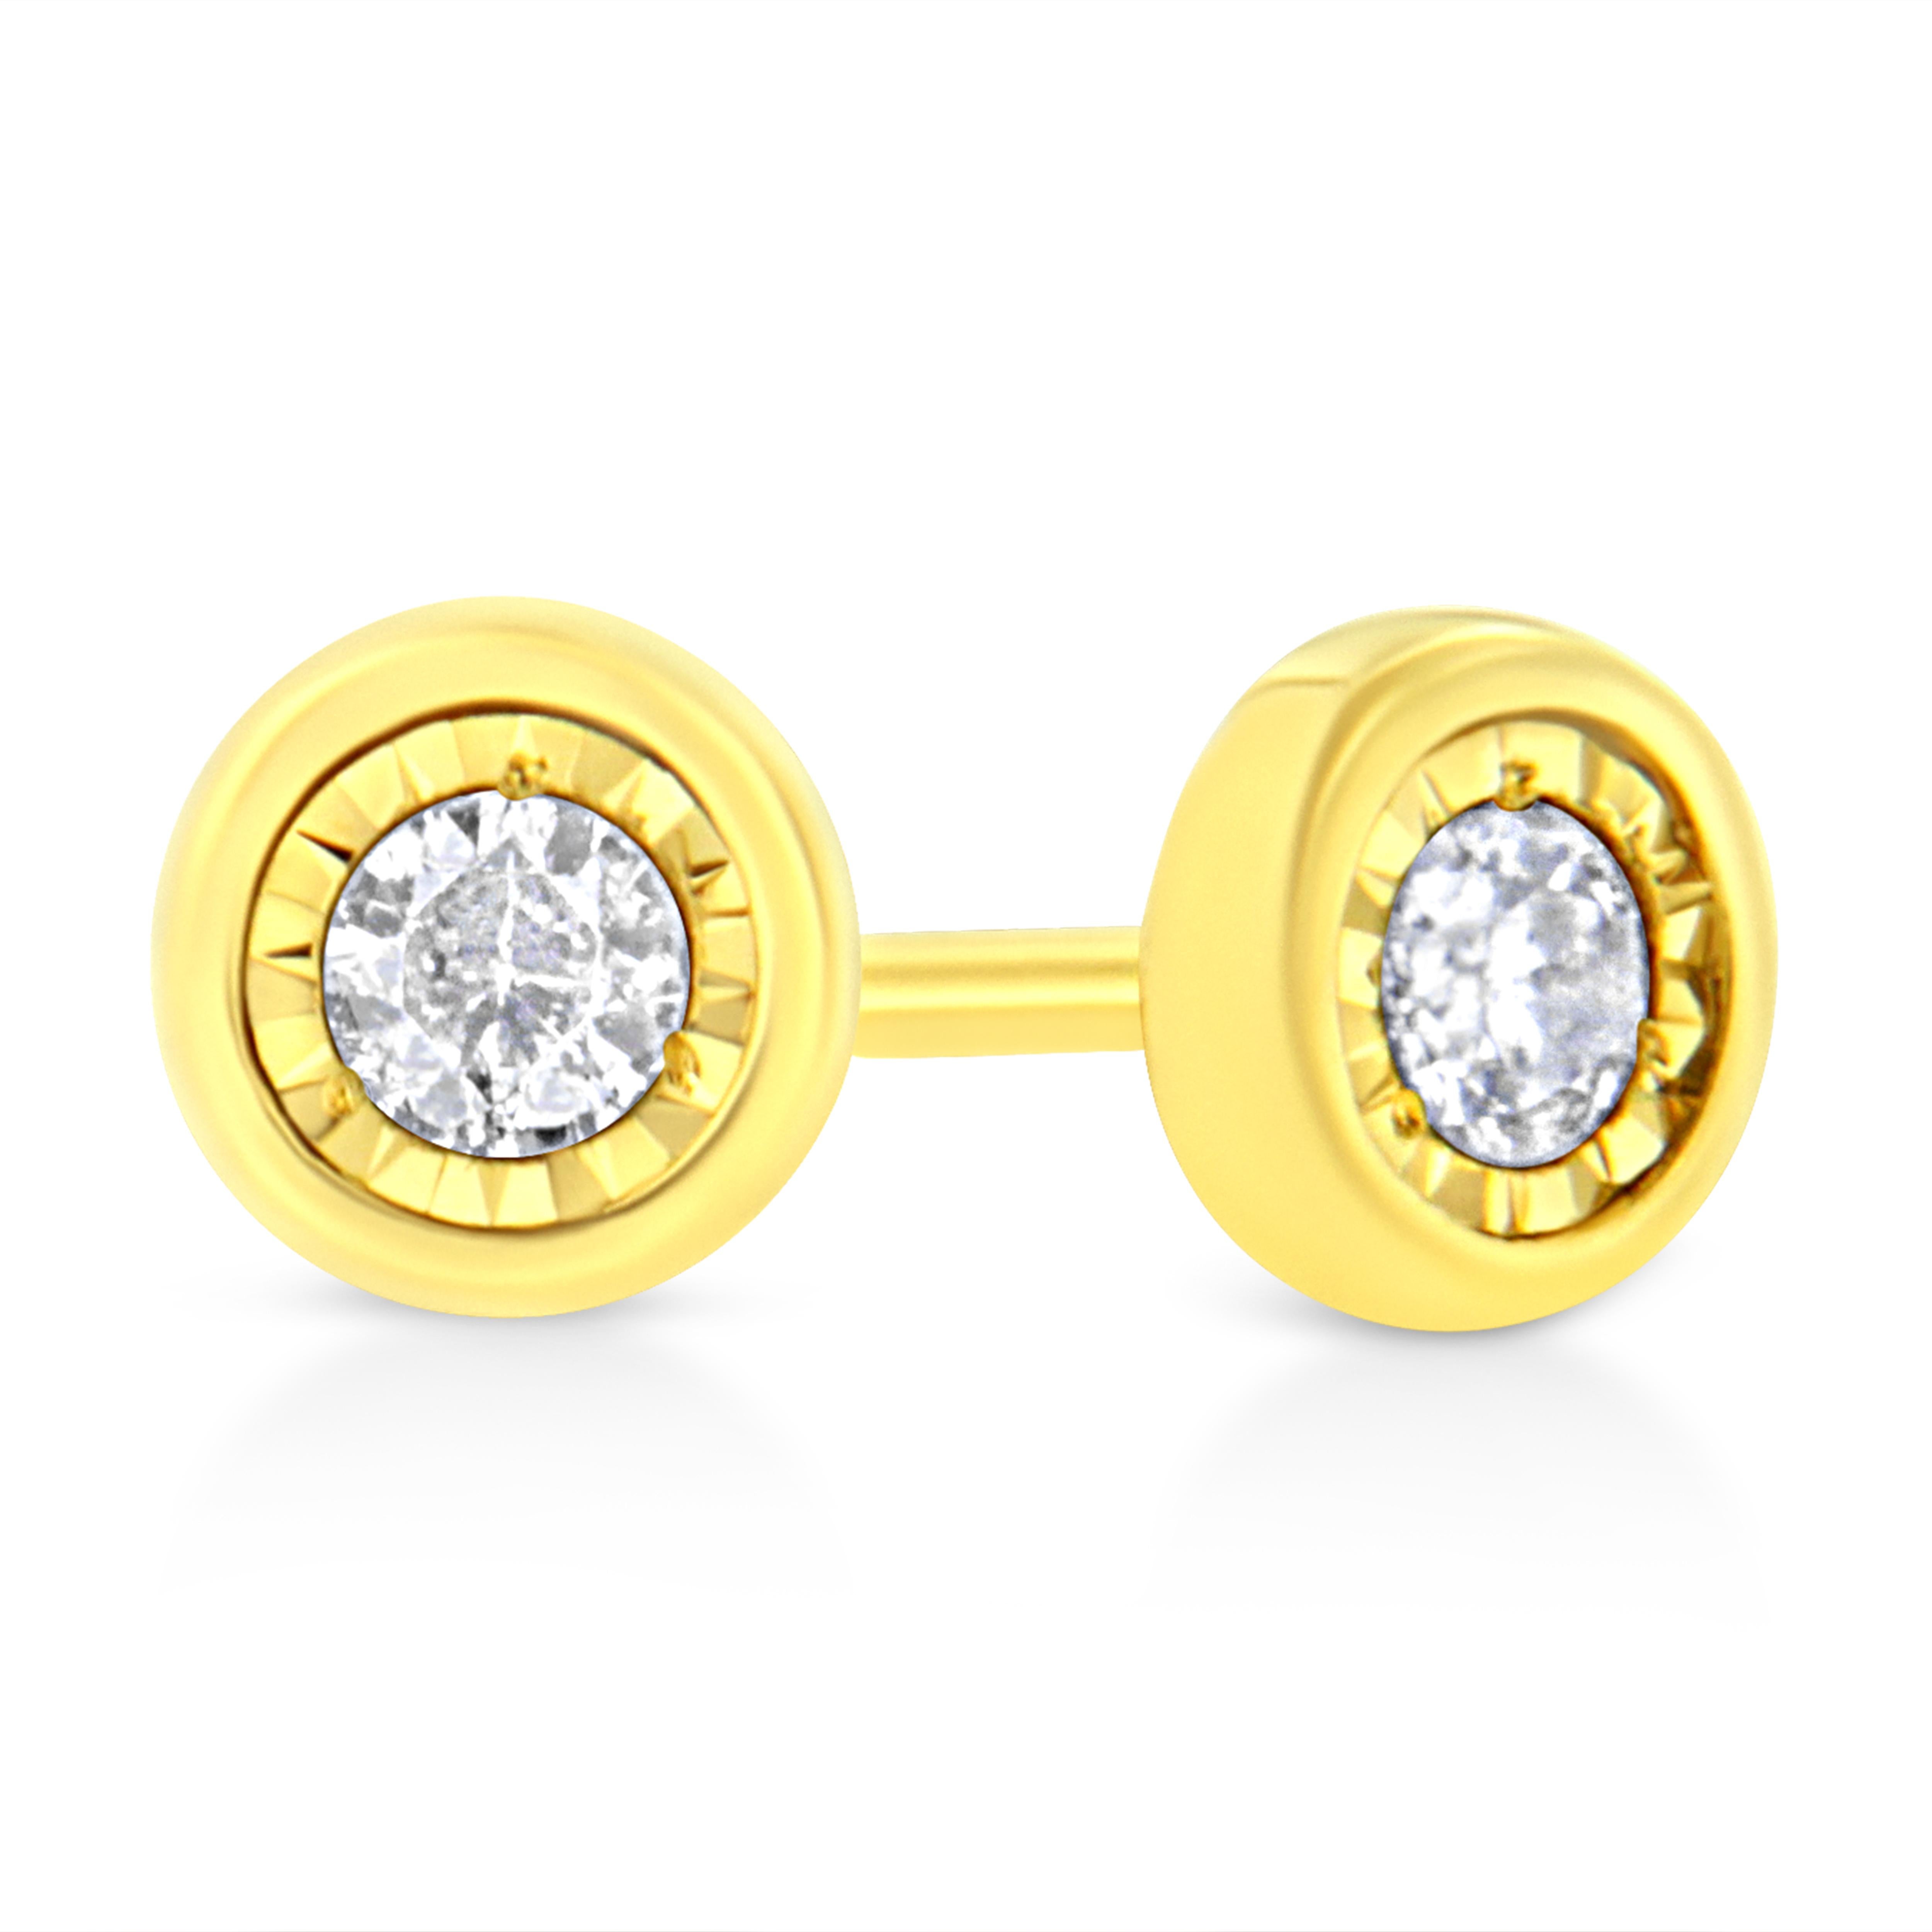 These circle shaped stud earrings are crafted in 10k yellow gold plated sterling silver and feature 1/10ct TDW of diamonds. Each earring features a single sparkling round cut diamond in a miracle setting that adds to the earrings sparkle. A polished